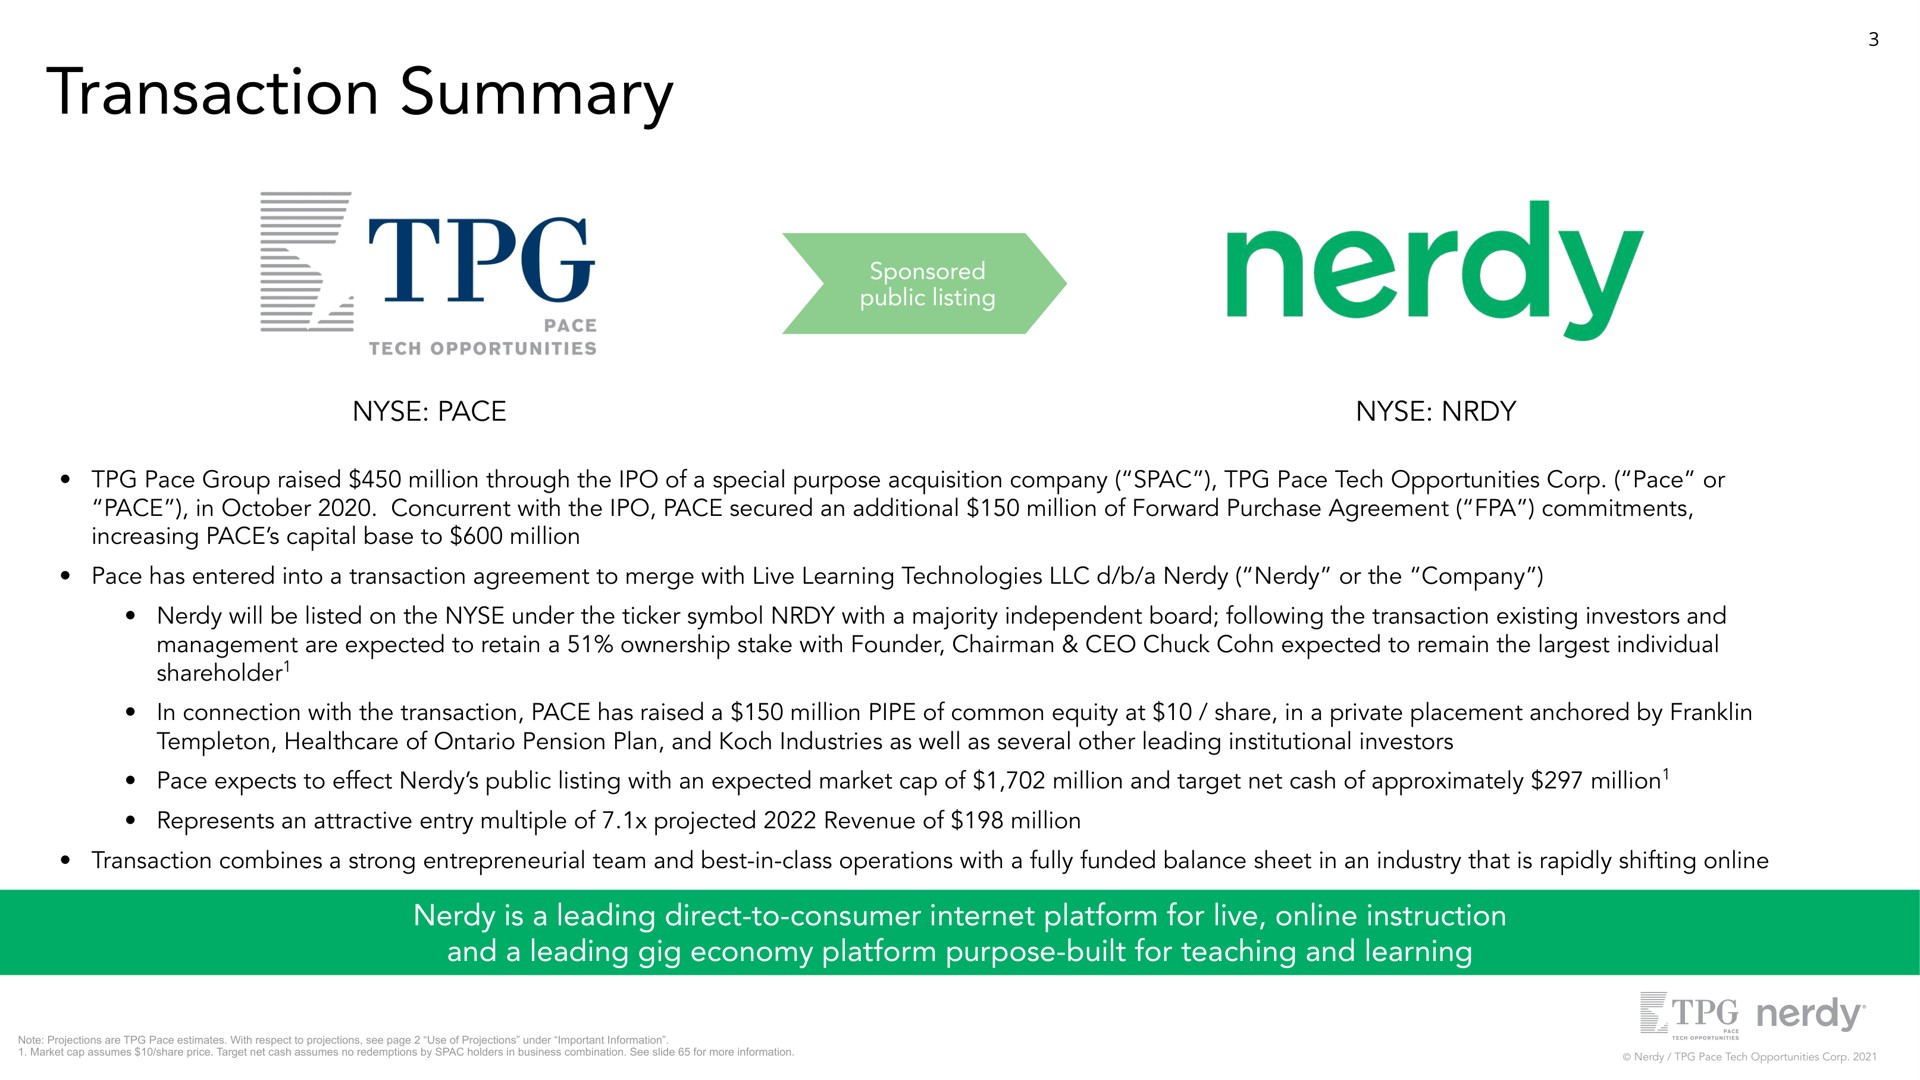 transaction summary pace is a leading direct to consumer platform for live instruction and a leading gig economy platform purpose built for teaching and learning | Nerdy